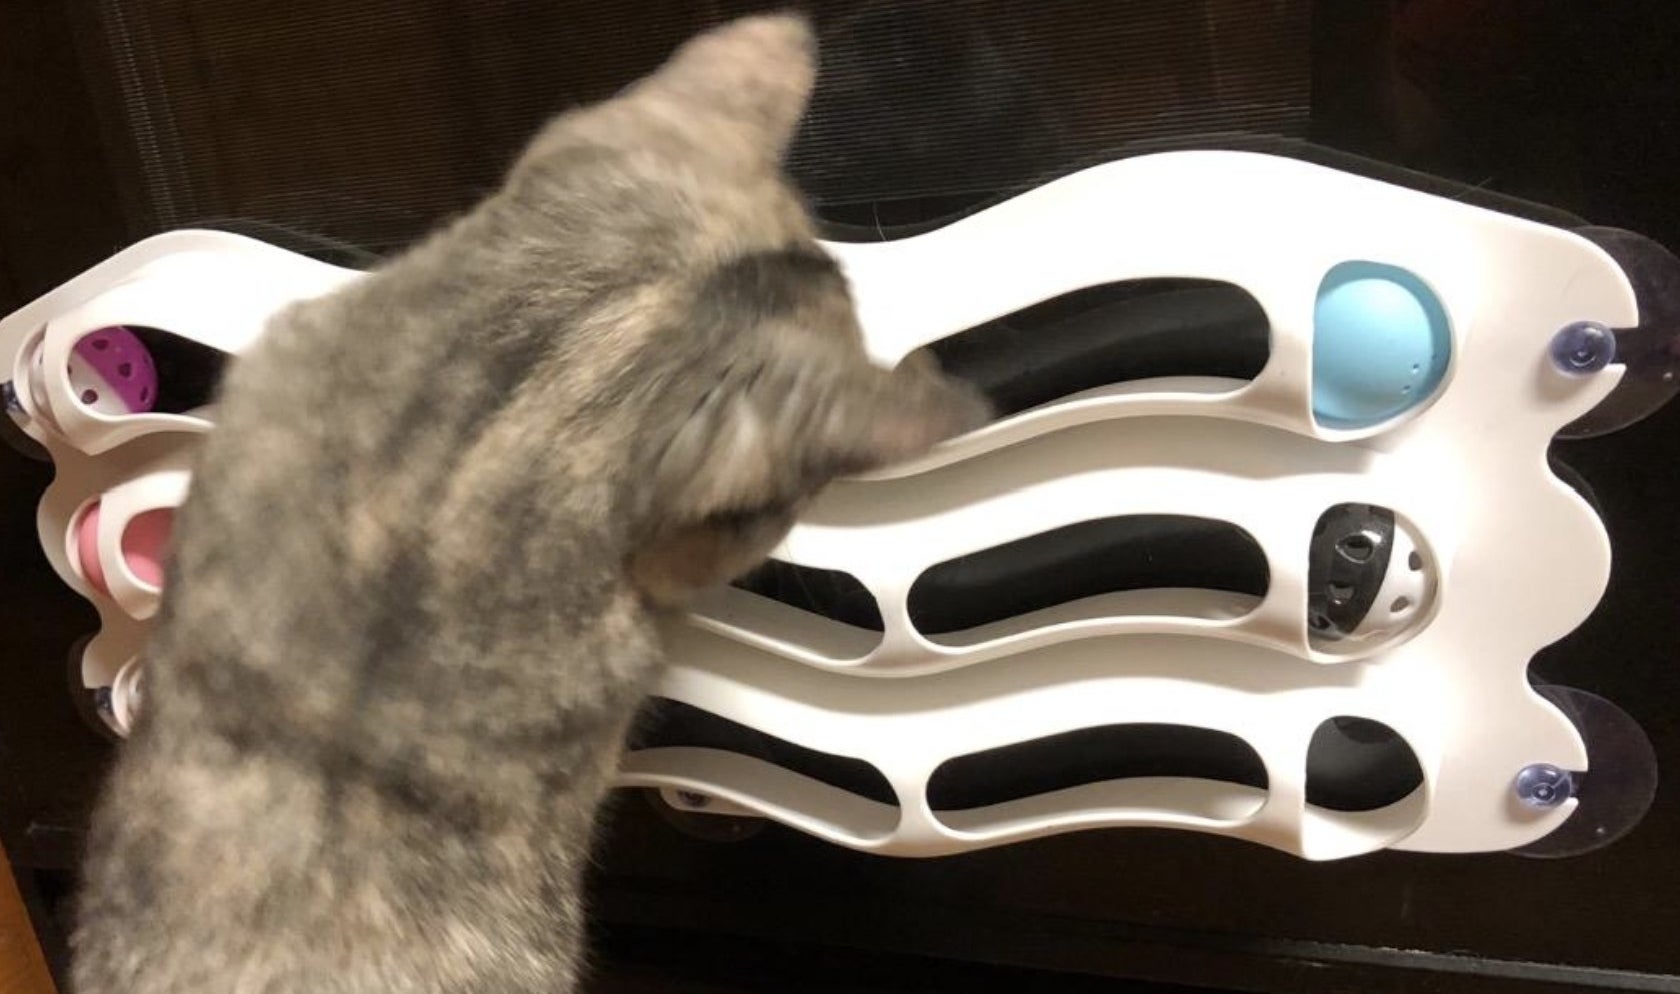 A cat playing with a three layered track toy that is suctioned to a window